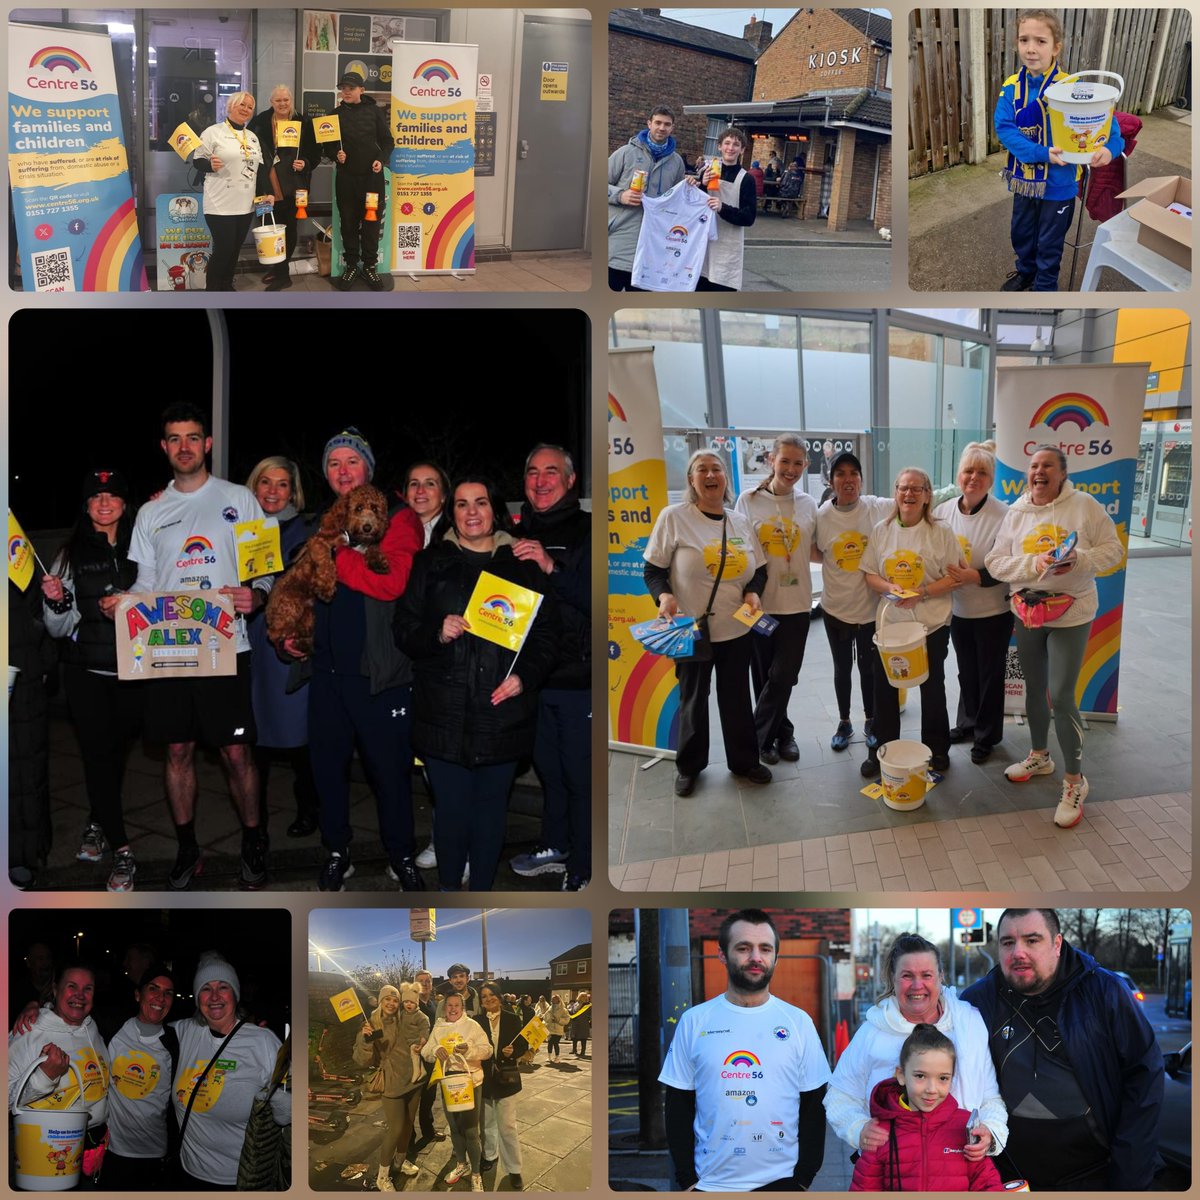 🎉£1,820.54 COLLECTED On Saturday our amazing team of volunteers collected an incredible £1,820.54 in their buckets alongside Alex's run! Thank you so much to everyone who volunteered with us or dropped money in a bucket 💛 @merseyrail @RotundaLtd @Bootle_FC @ASDABootle